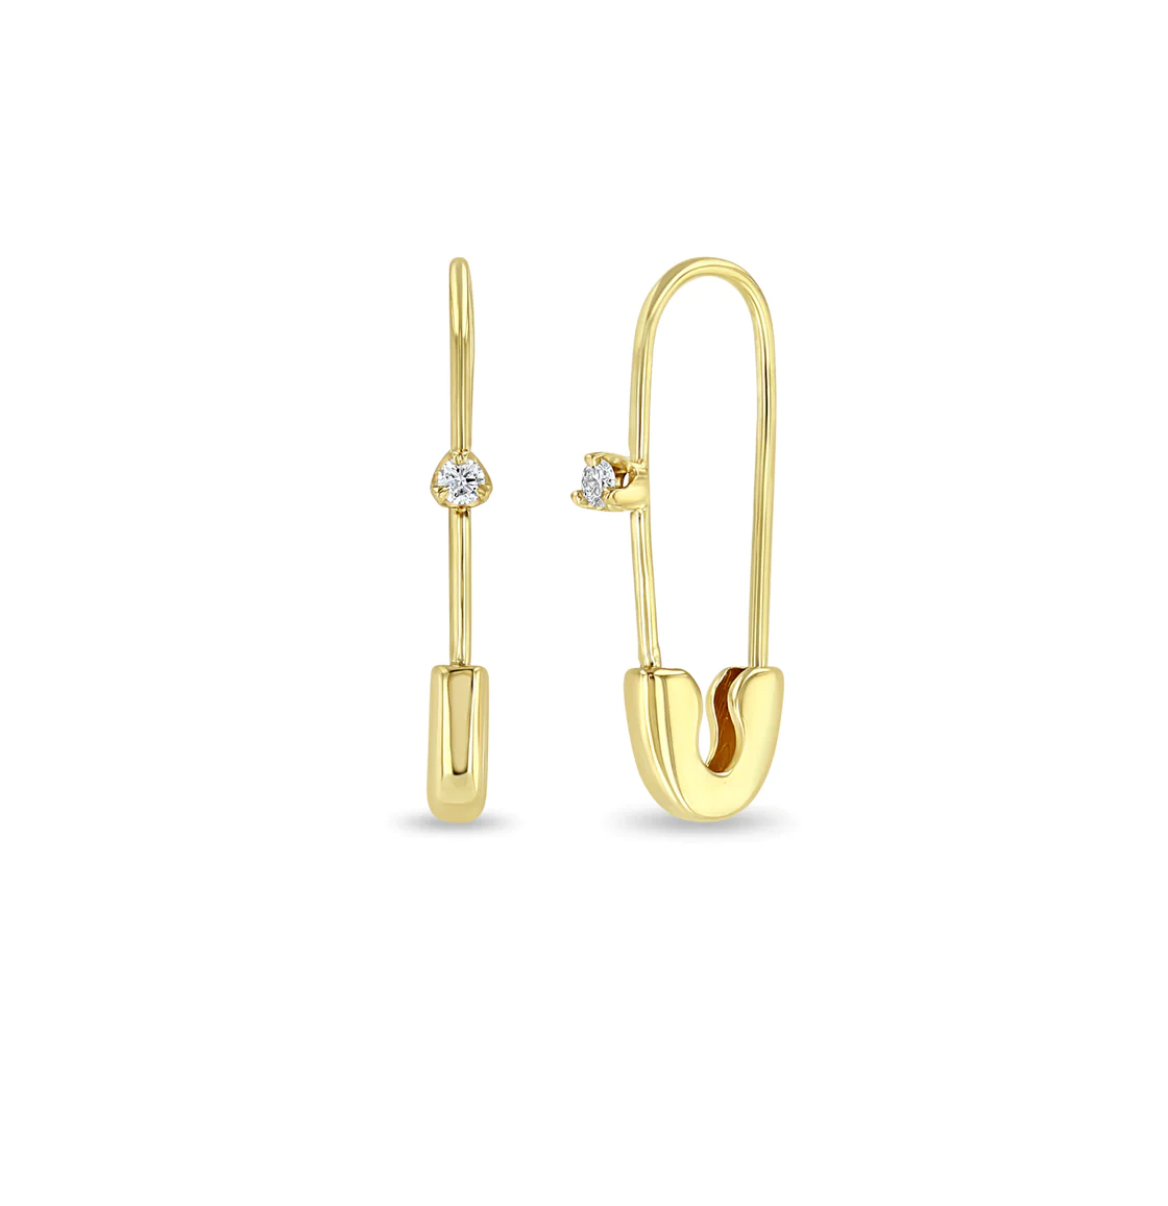 Zoe Chicco 14k Gold Safety Pin with Prong Diamond Threader Earring